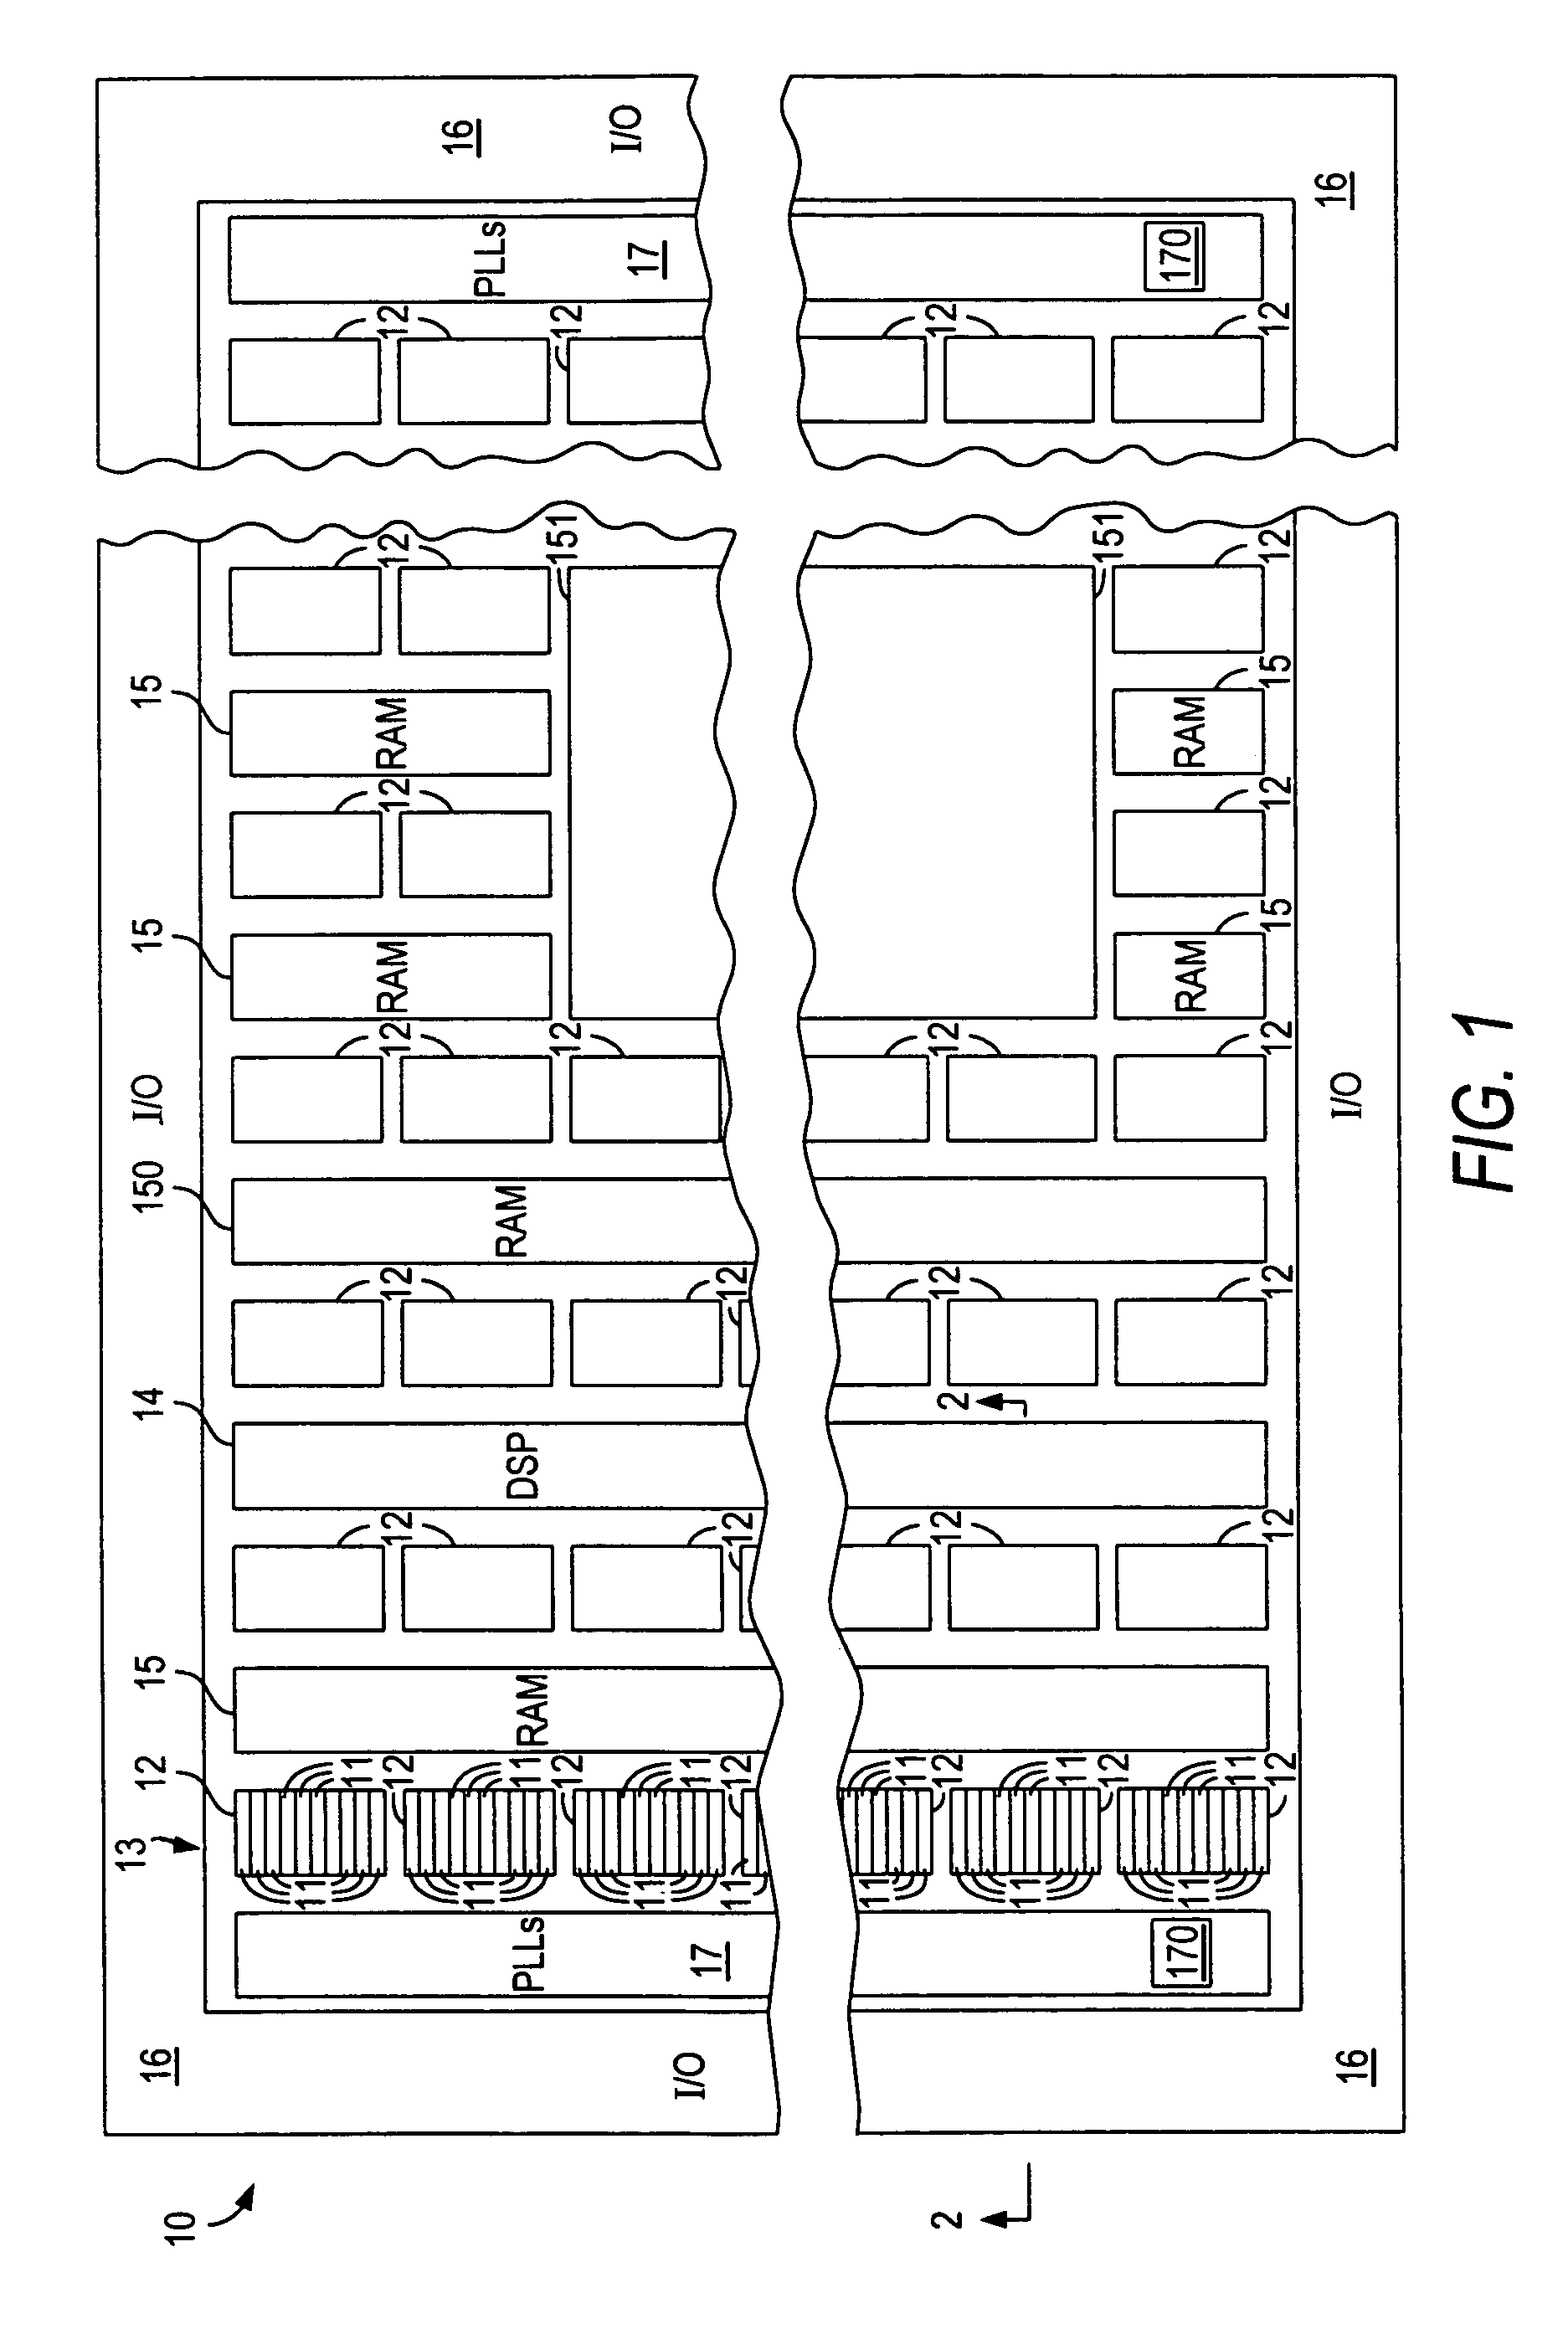 Mask-programmable logic device with programmable portions